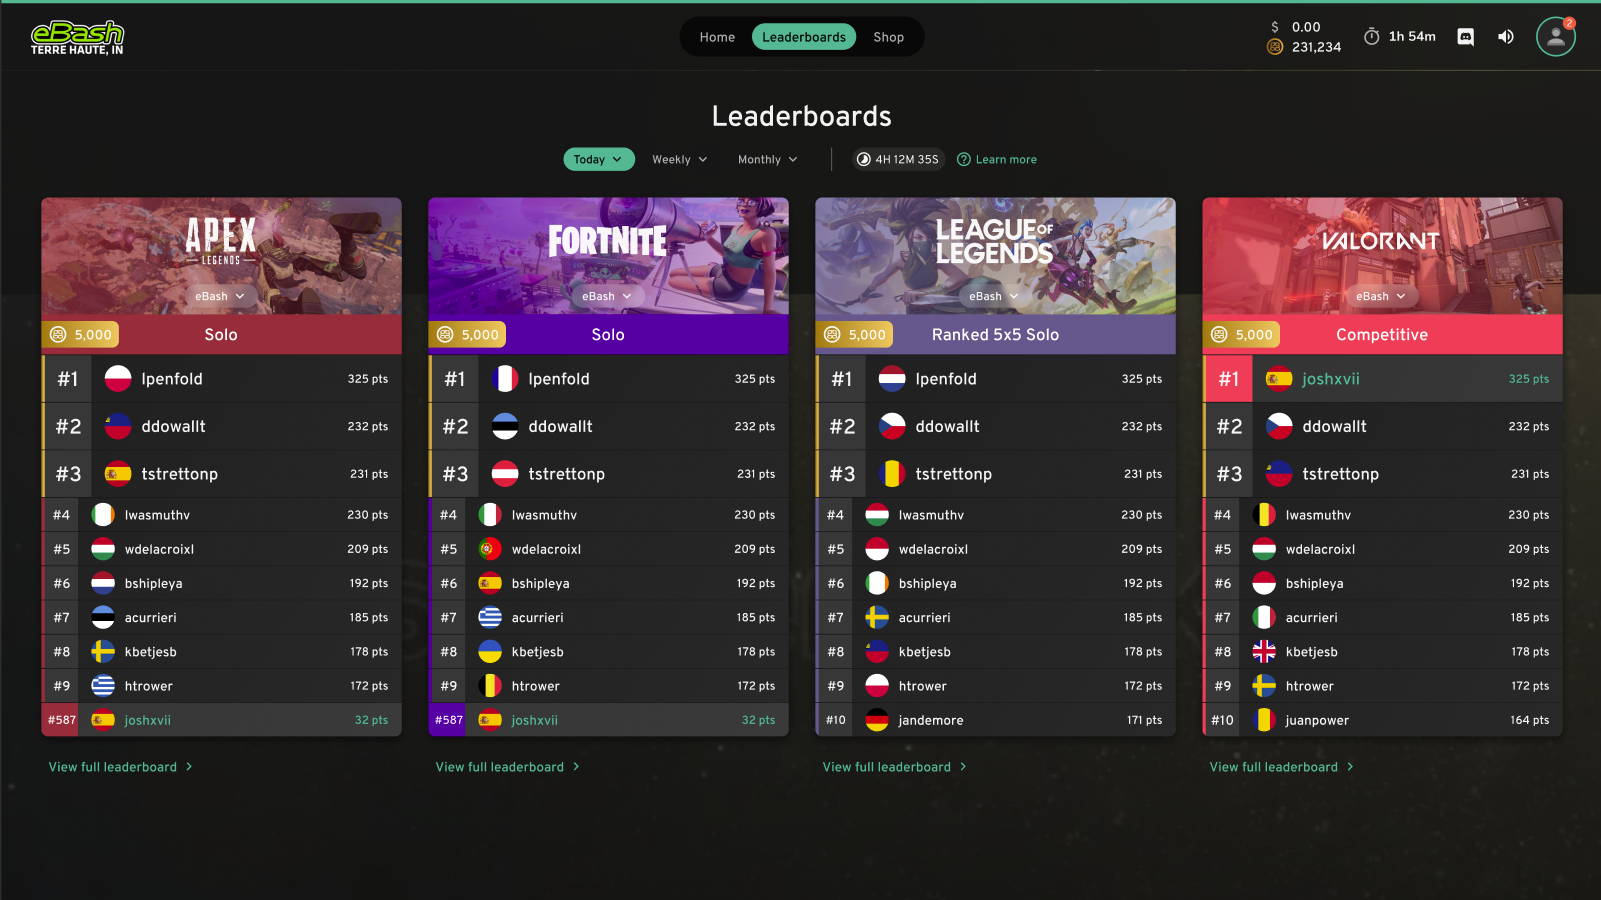 Mock up of how the leaderboards will look like in the client